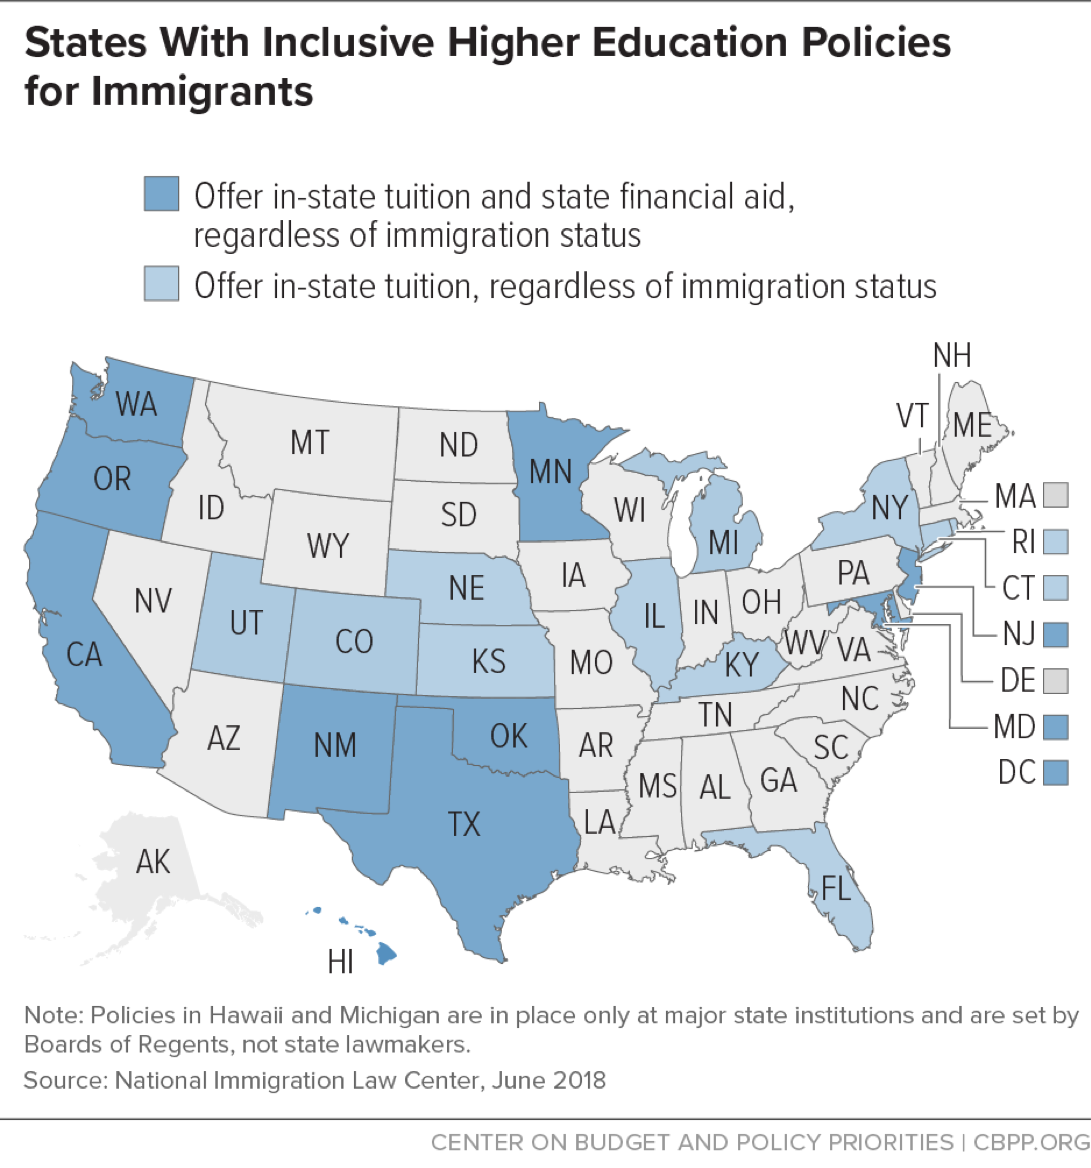 States With Inclusive Higher Education Policies for Immigrants